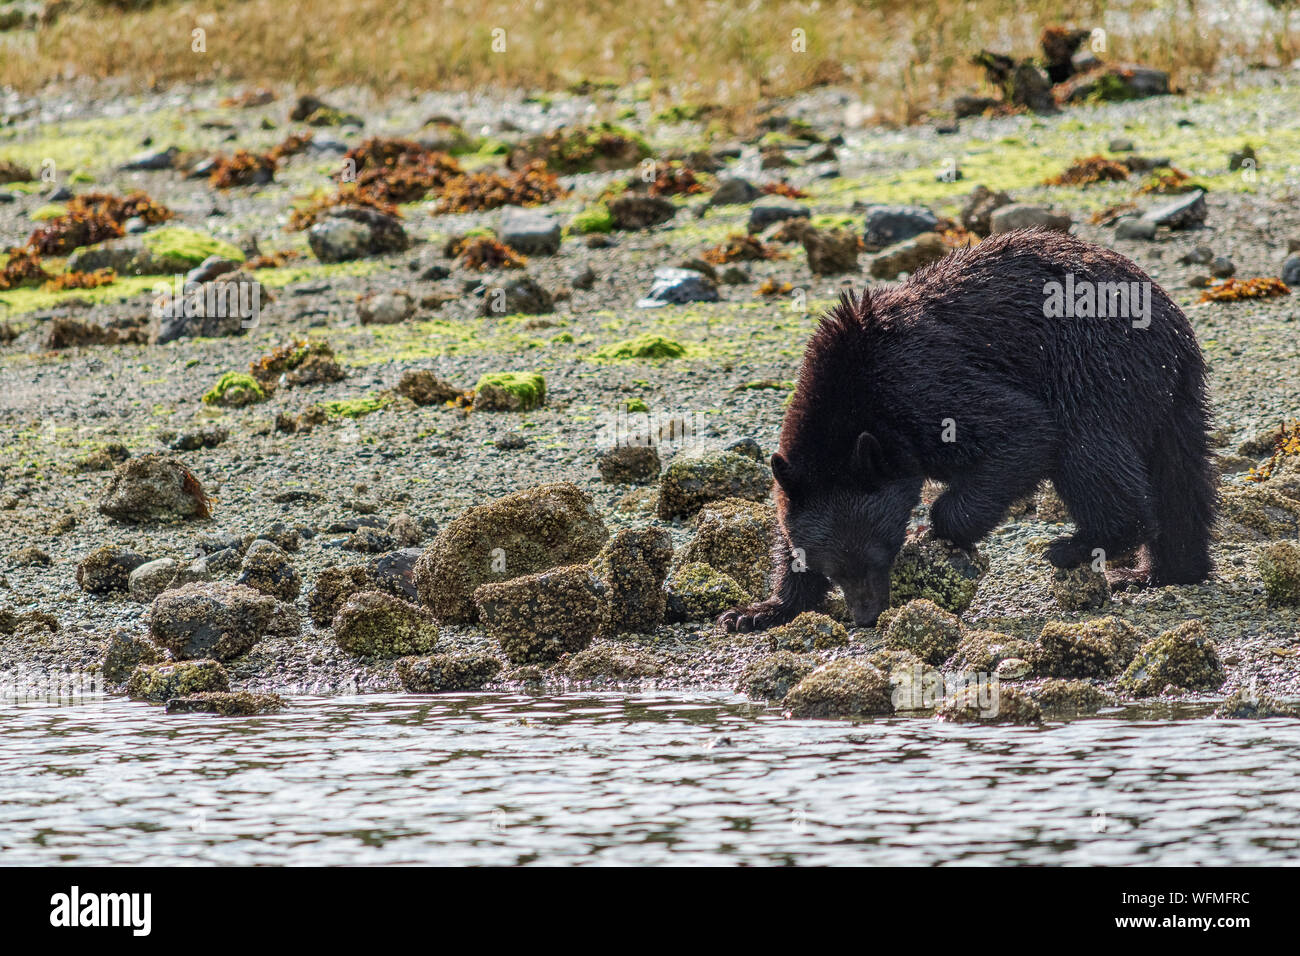 A black bear turns over rocks looking for crabs on a beach near the town of Tofino on Vancouver Island, BC. Bear boat tours are popular for visitors. Stock Photo